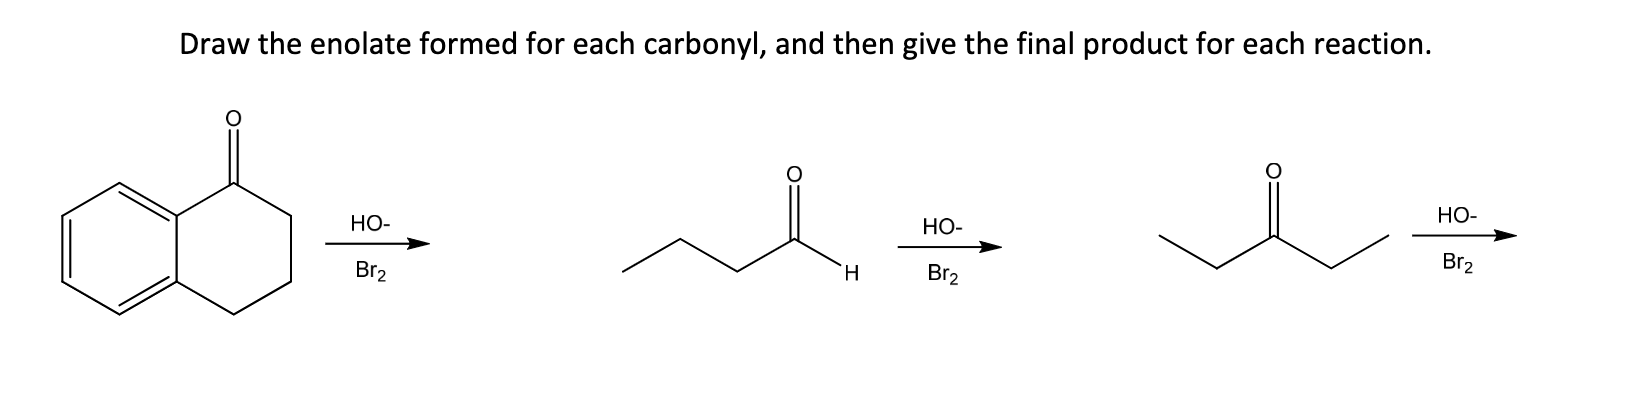 Draw the enolate formed for each carbonyl, and then give the final product for each reaction.
\( \stackrel{\mathrm{HO}-}{\mat